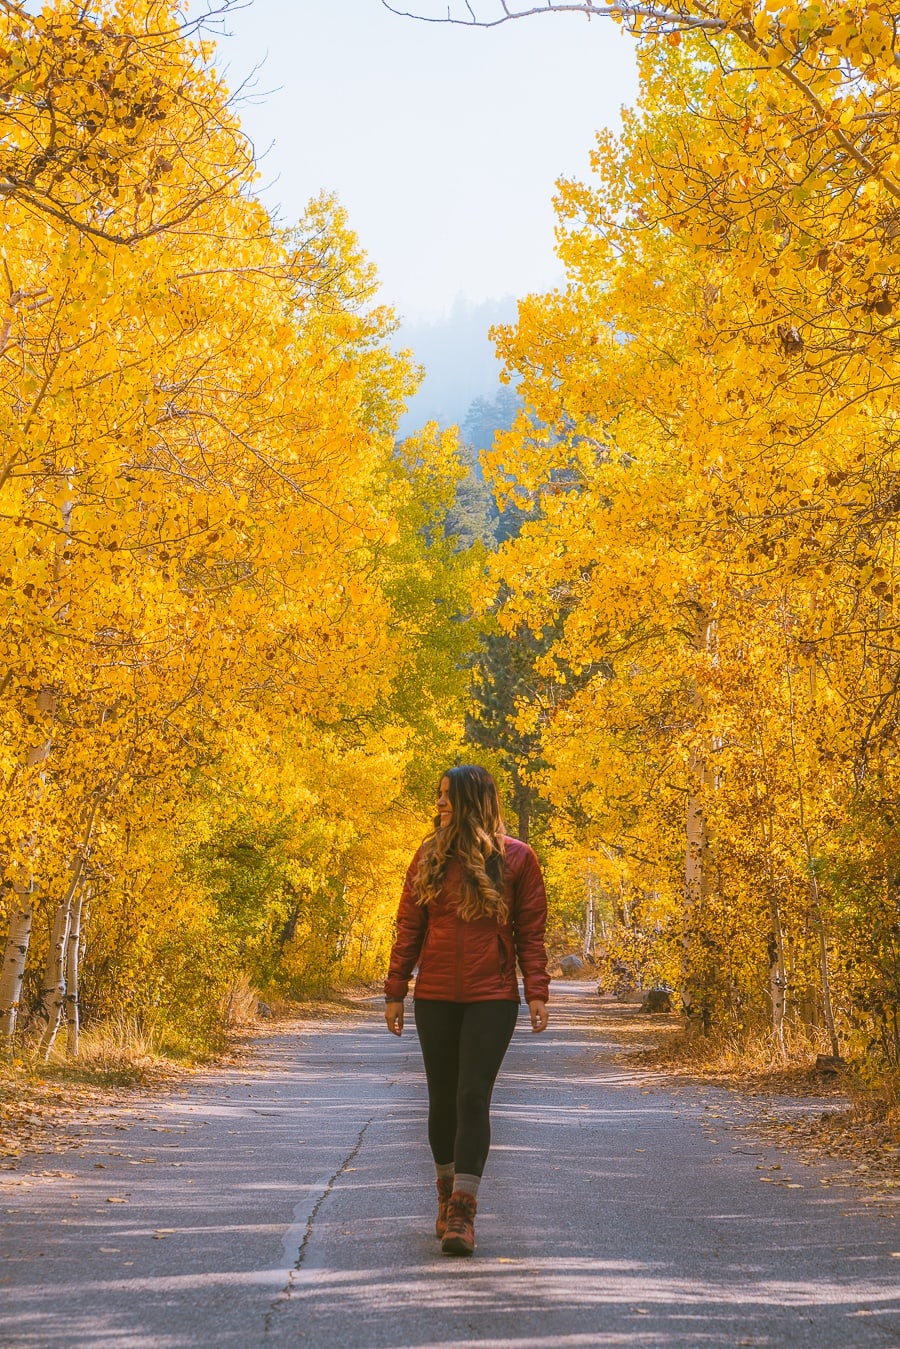 What to Wear Hiking in the Fall